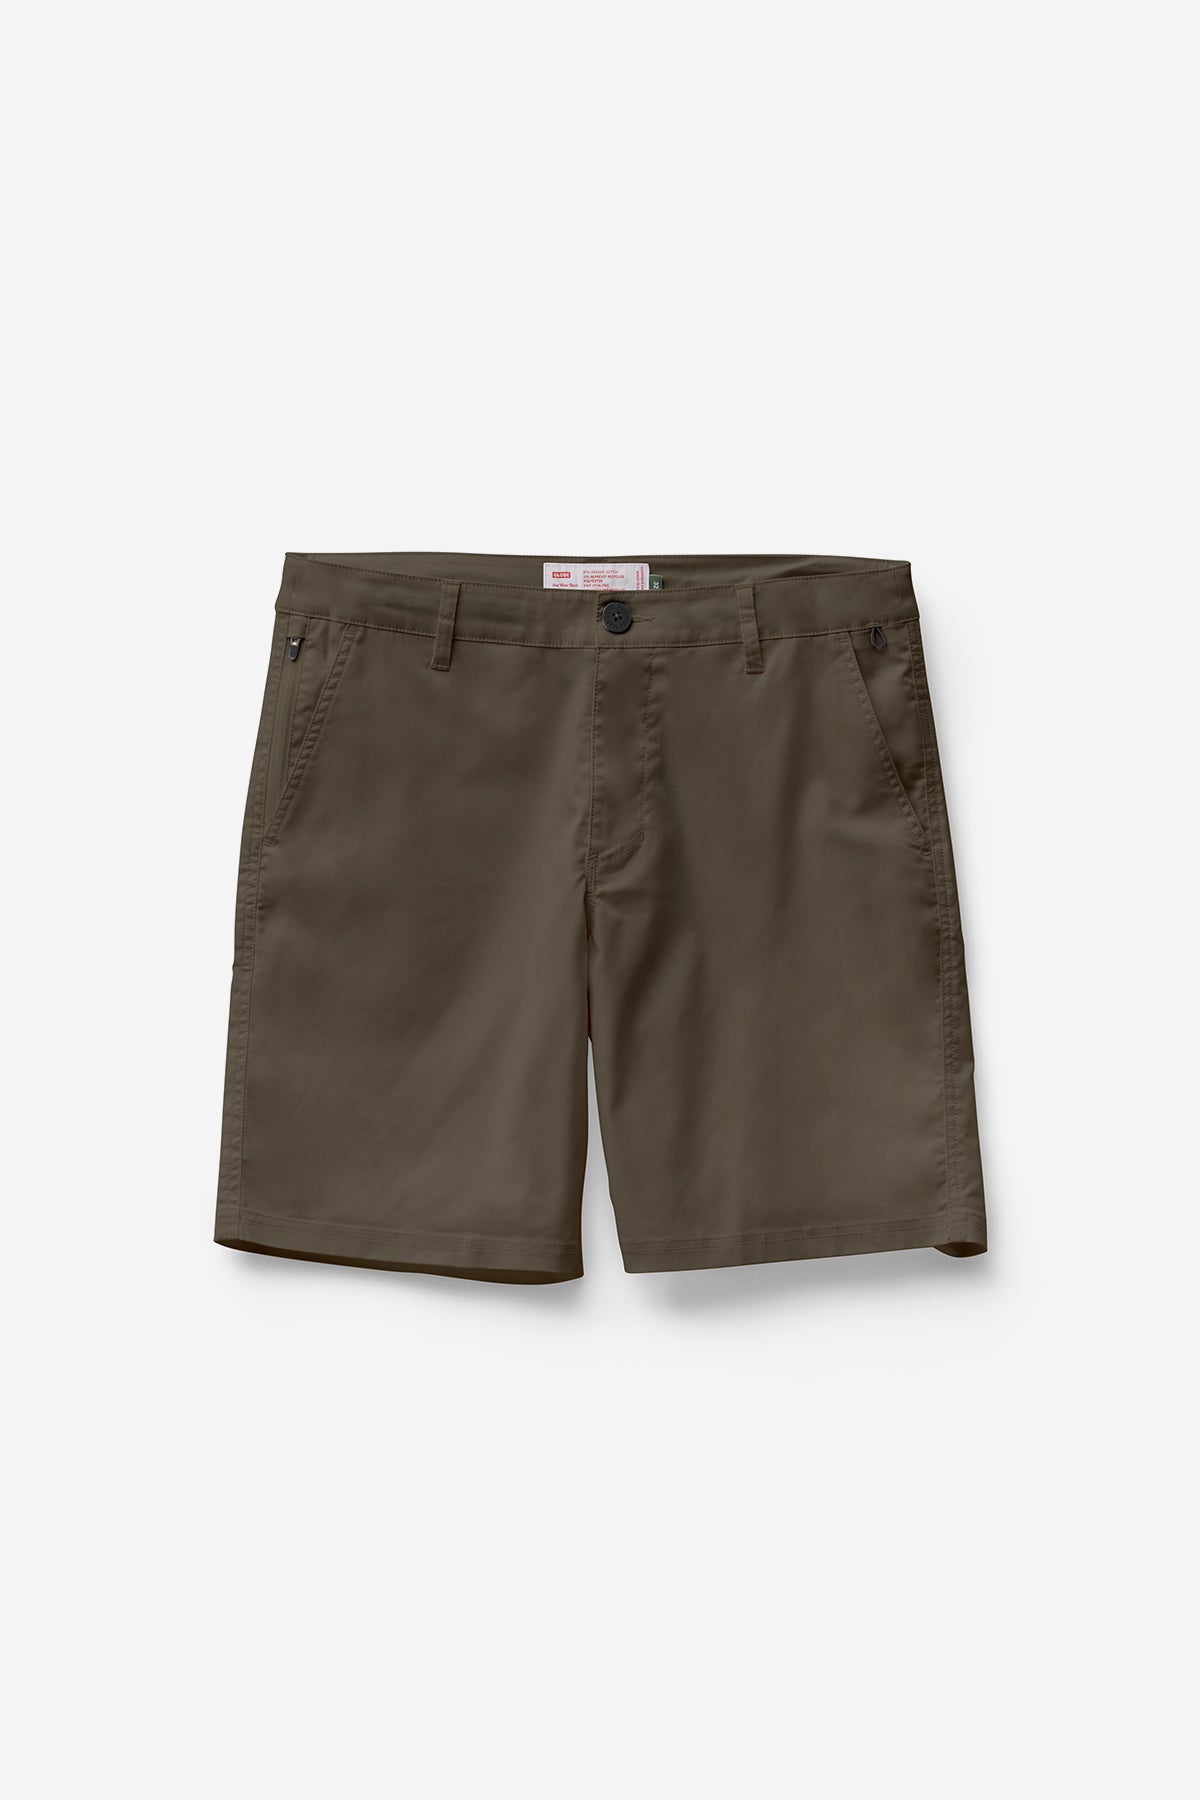 off body view of Any Wear Short - Forest